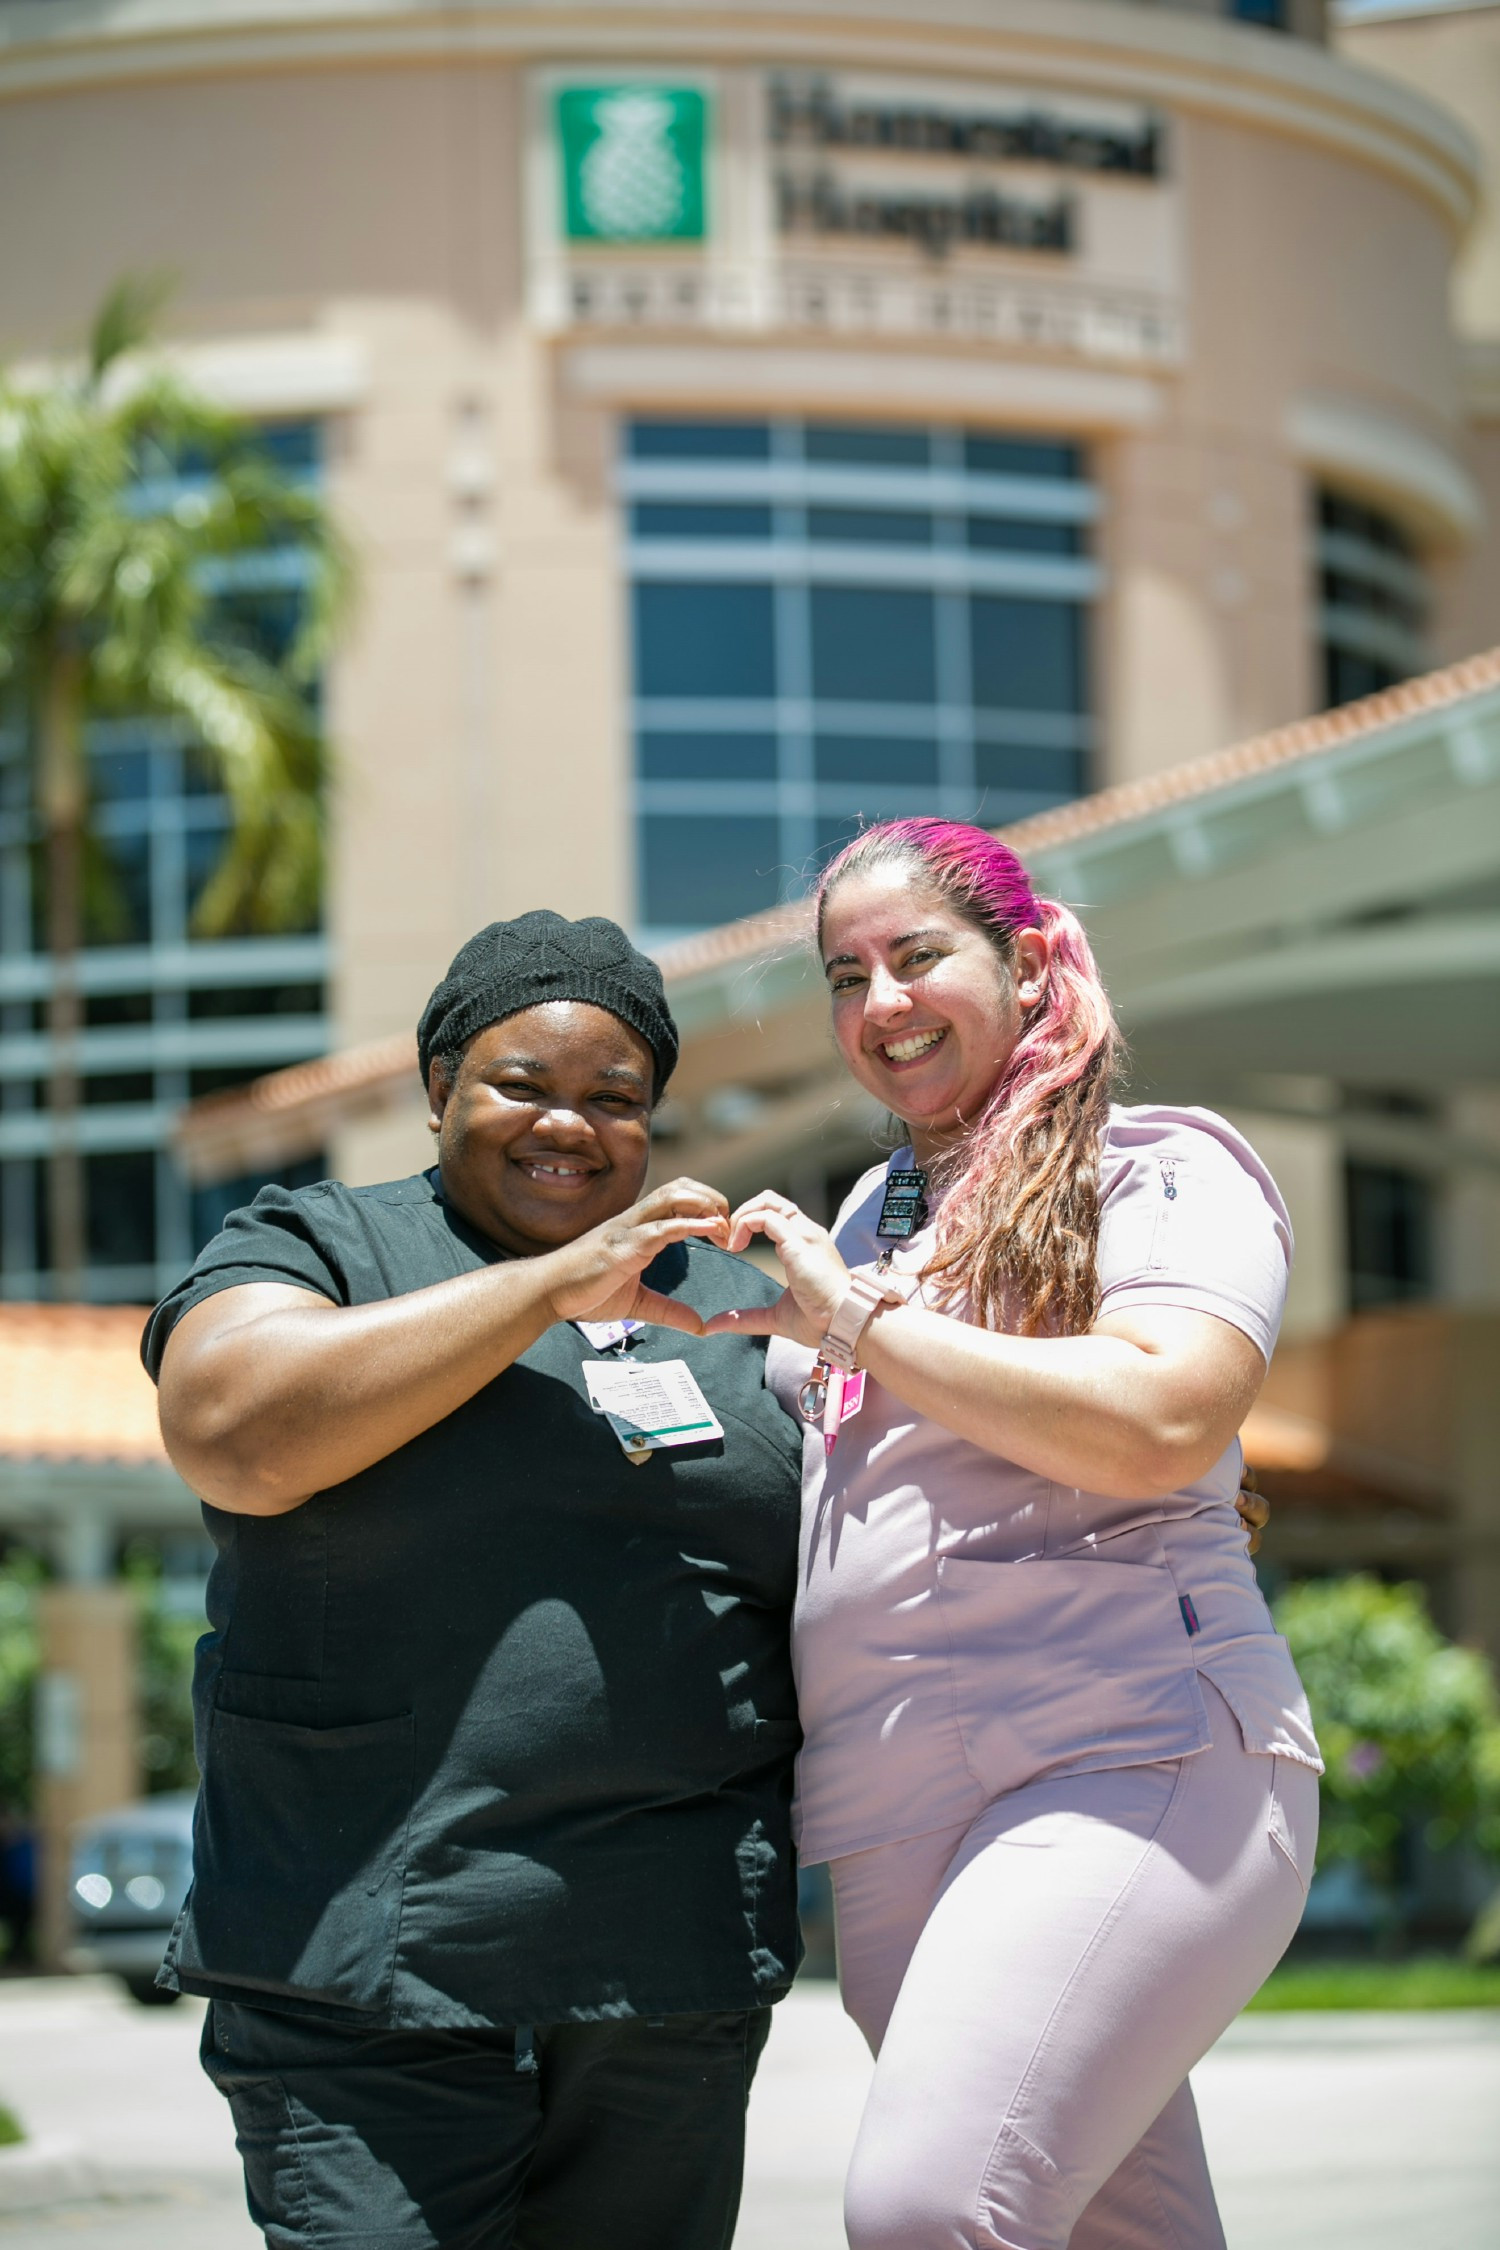 Baptist Health employees are part of a diverse community, one that values differences and unique points of view.